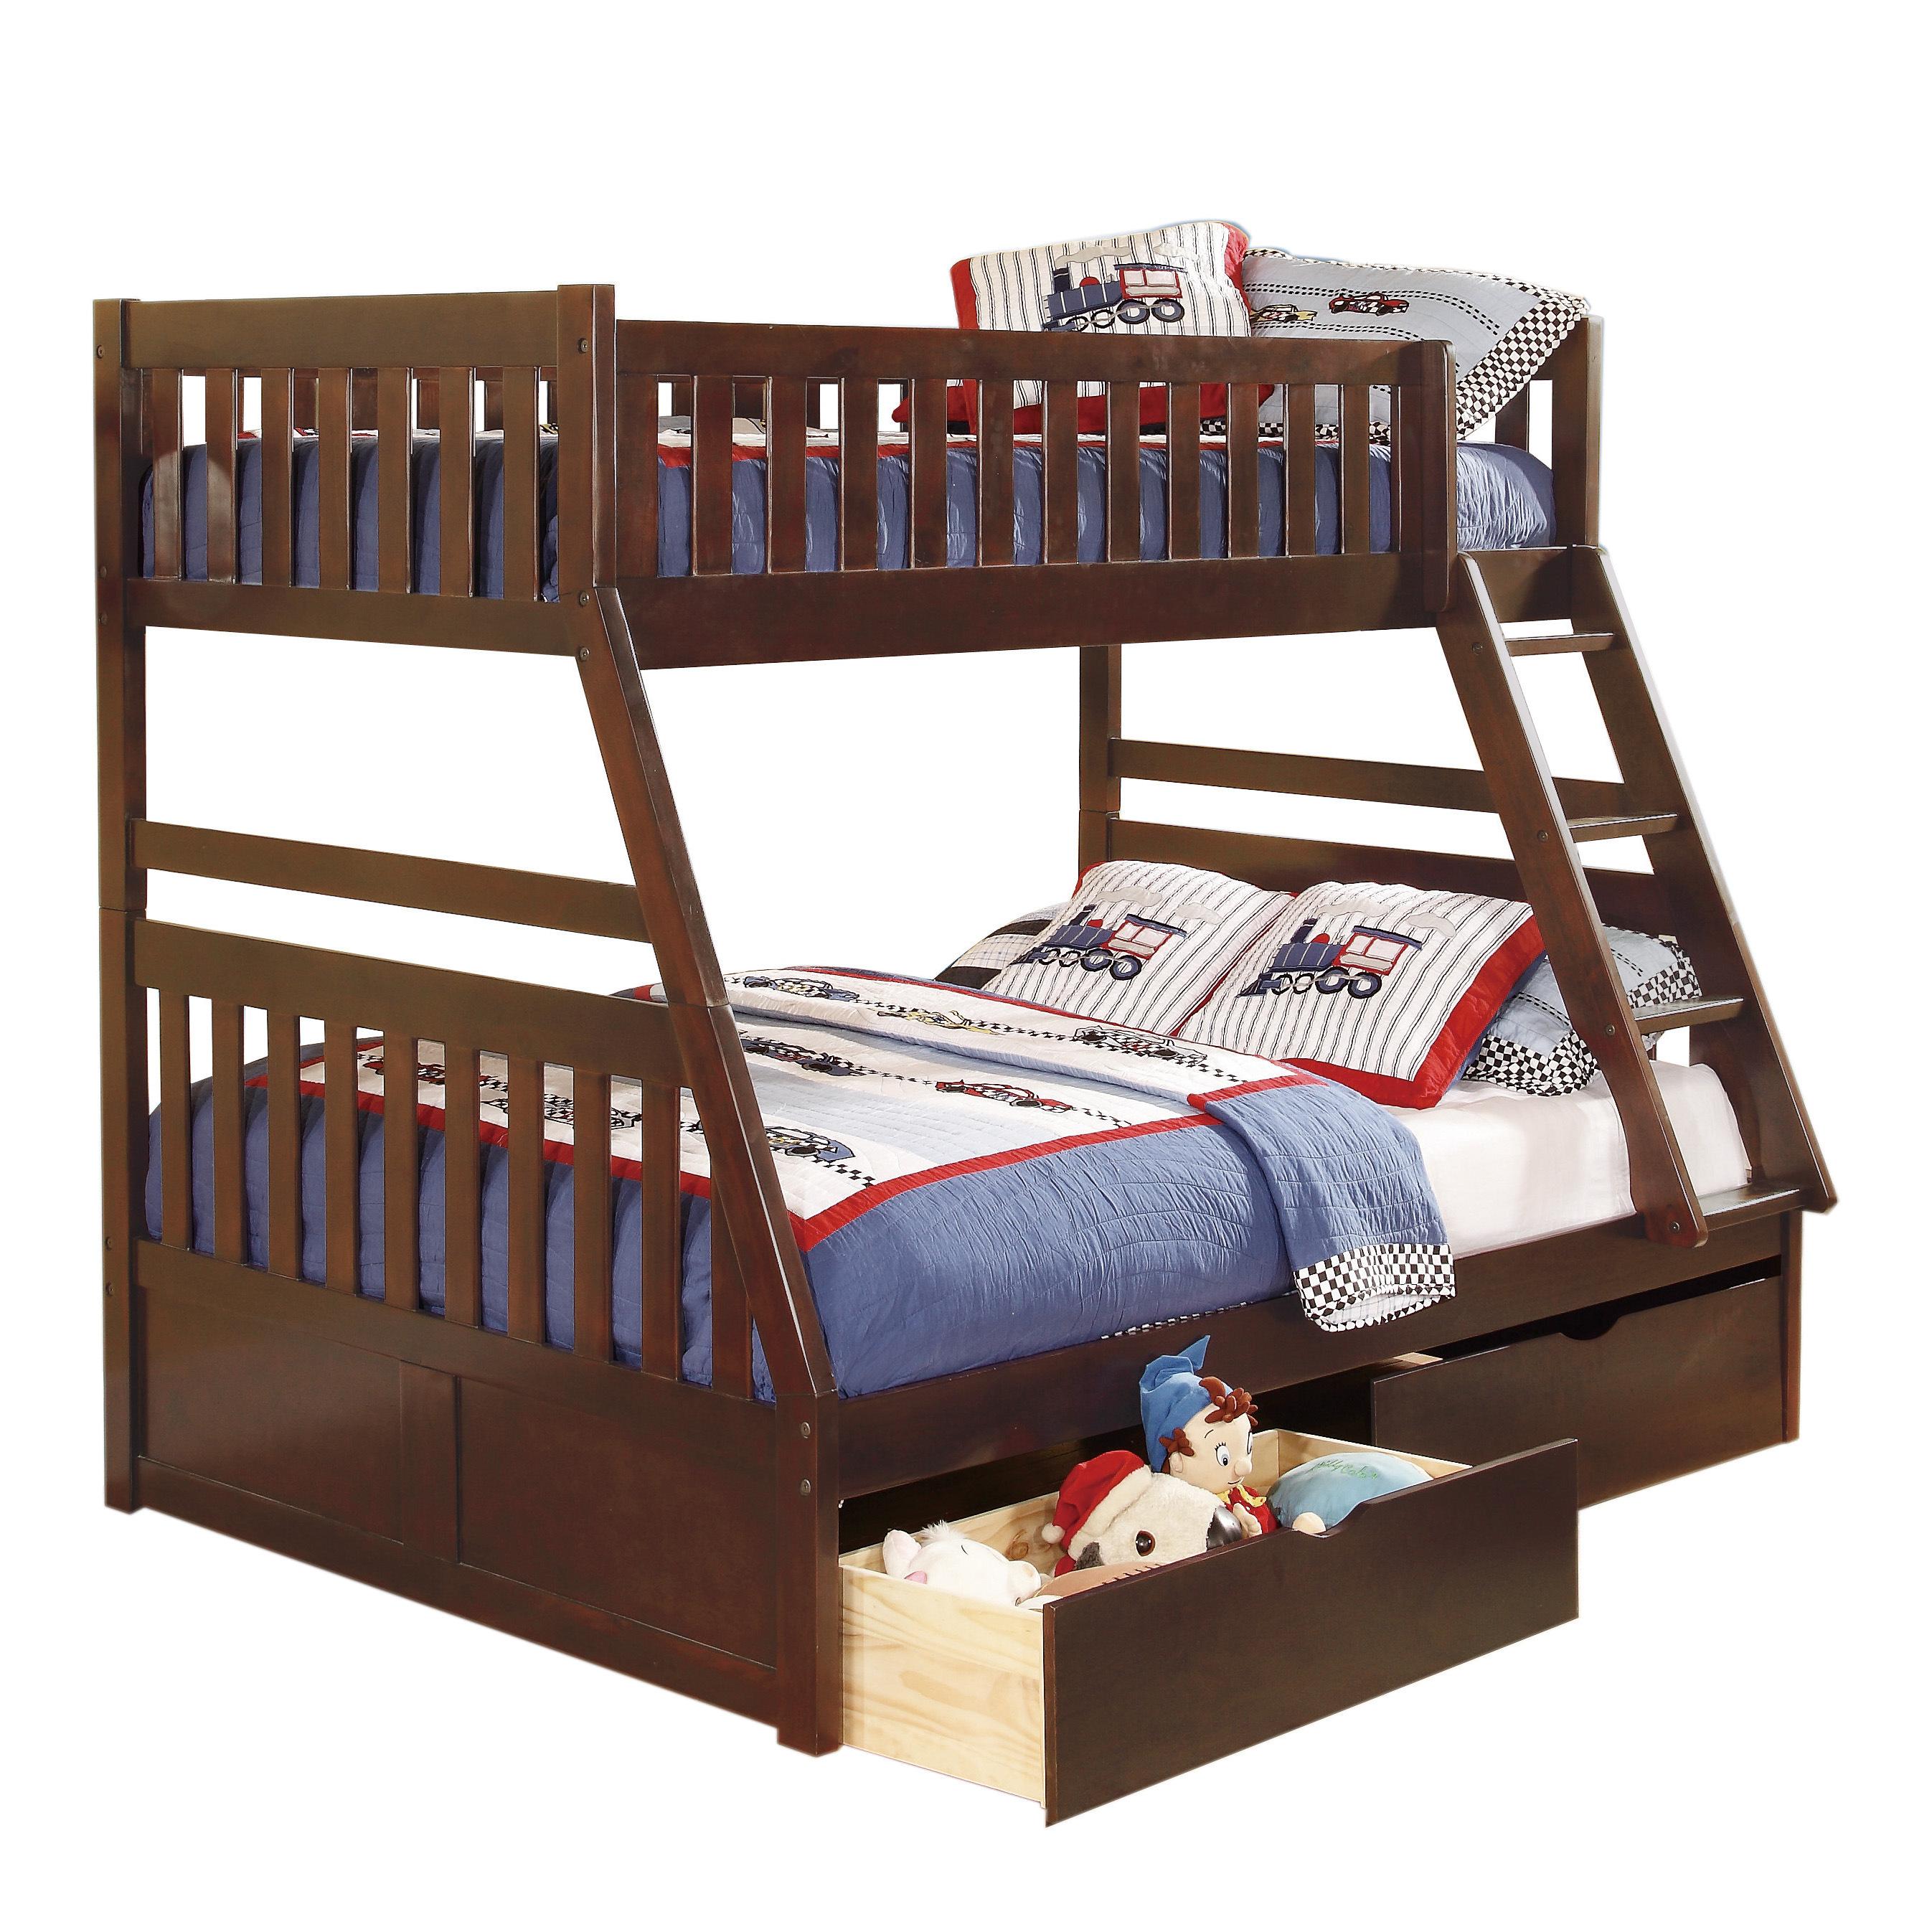 

    
Transitional Dark Cherry Wood Twin/Full Bunk Bed w/Storage Boxes Homelegance B2013TFDC-1*T Rowe
